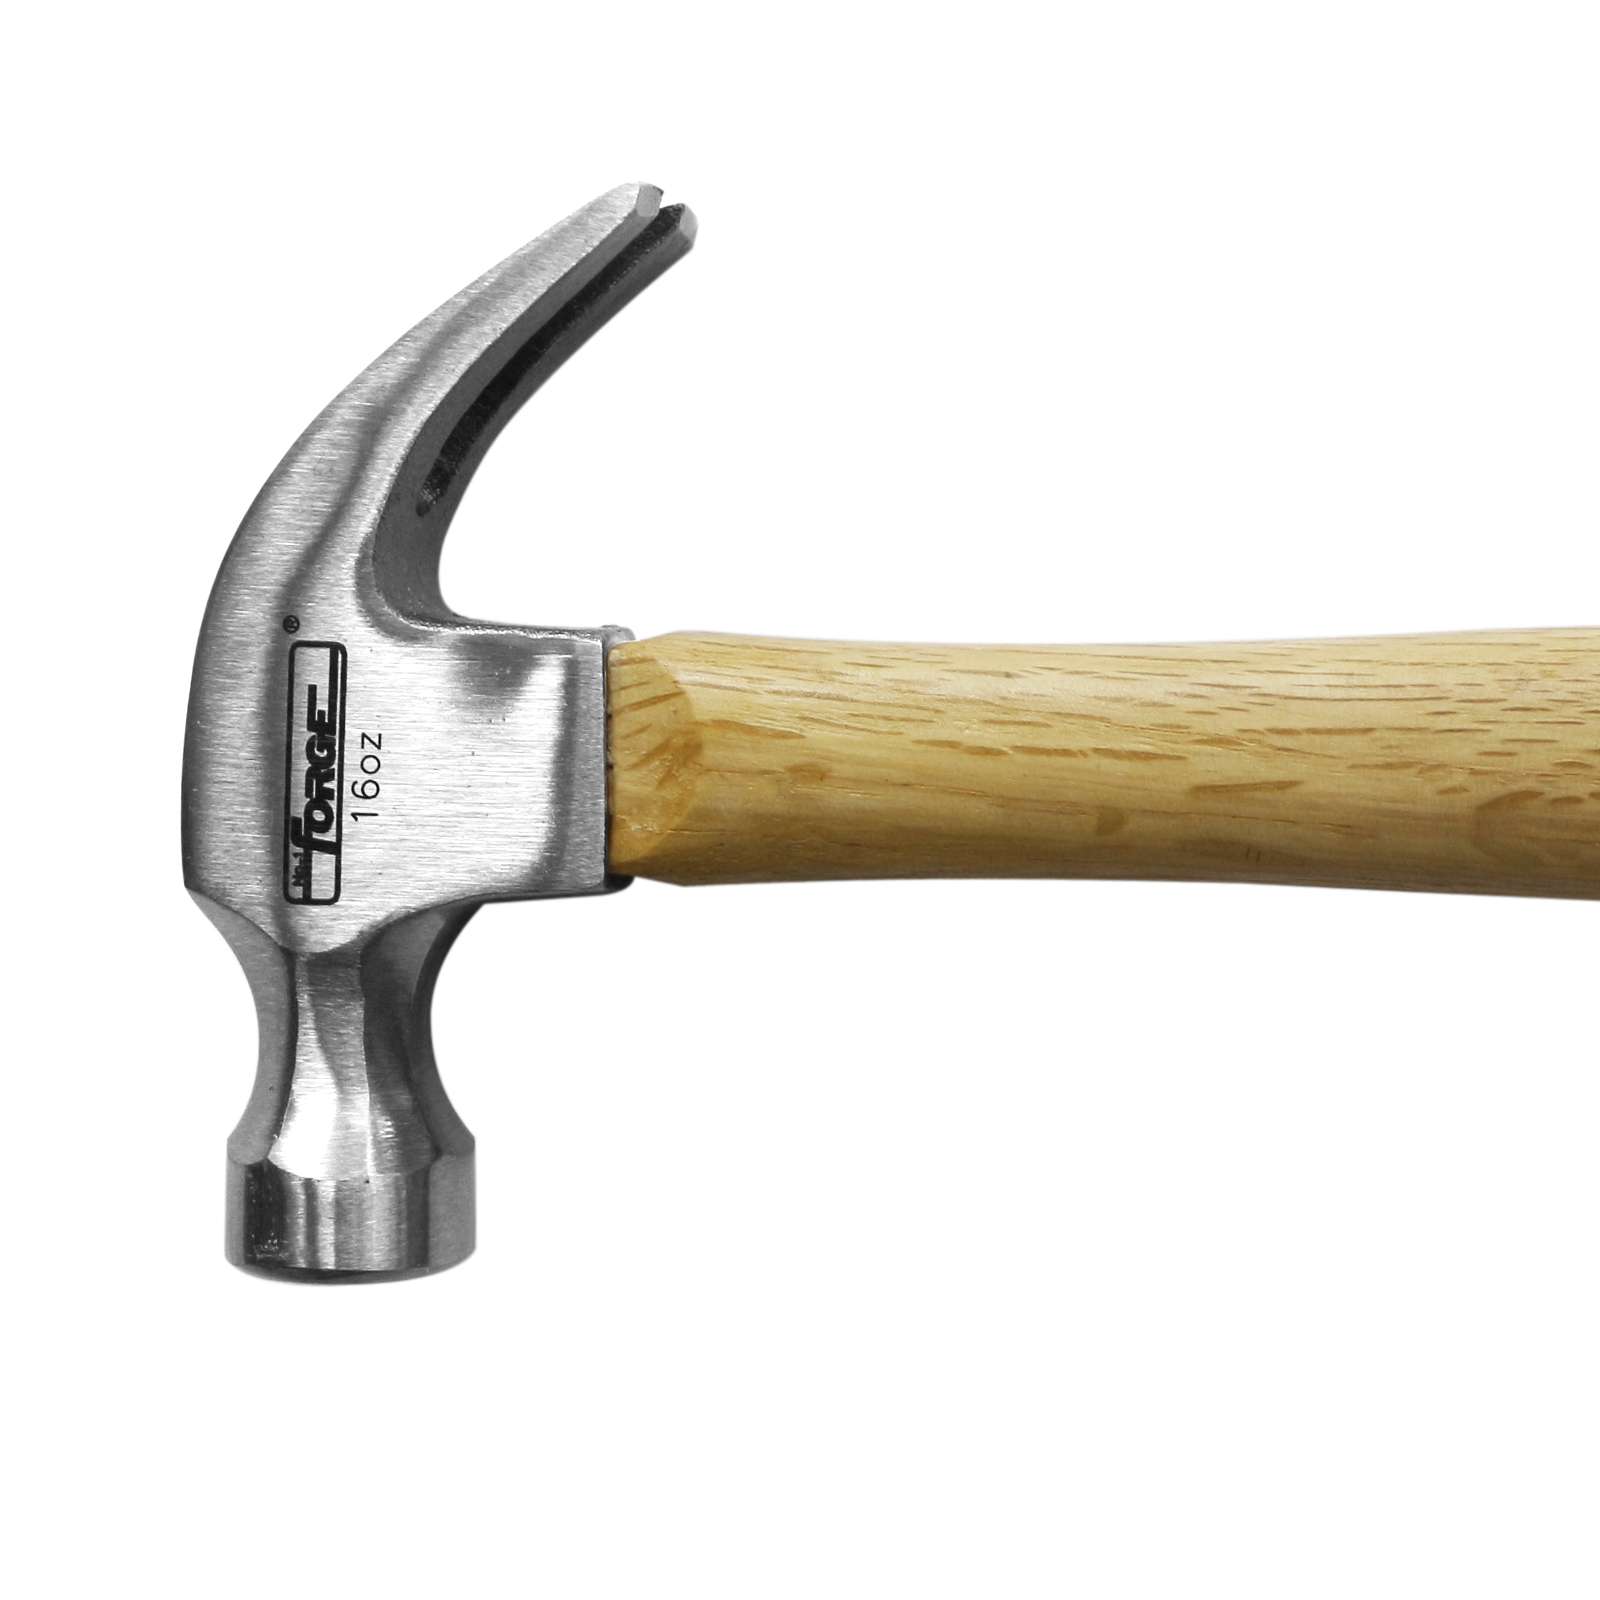 16 oz. Forged Carbon Steel Head Claw Hammer with Wood Handle - 3